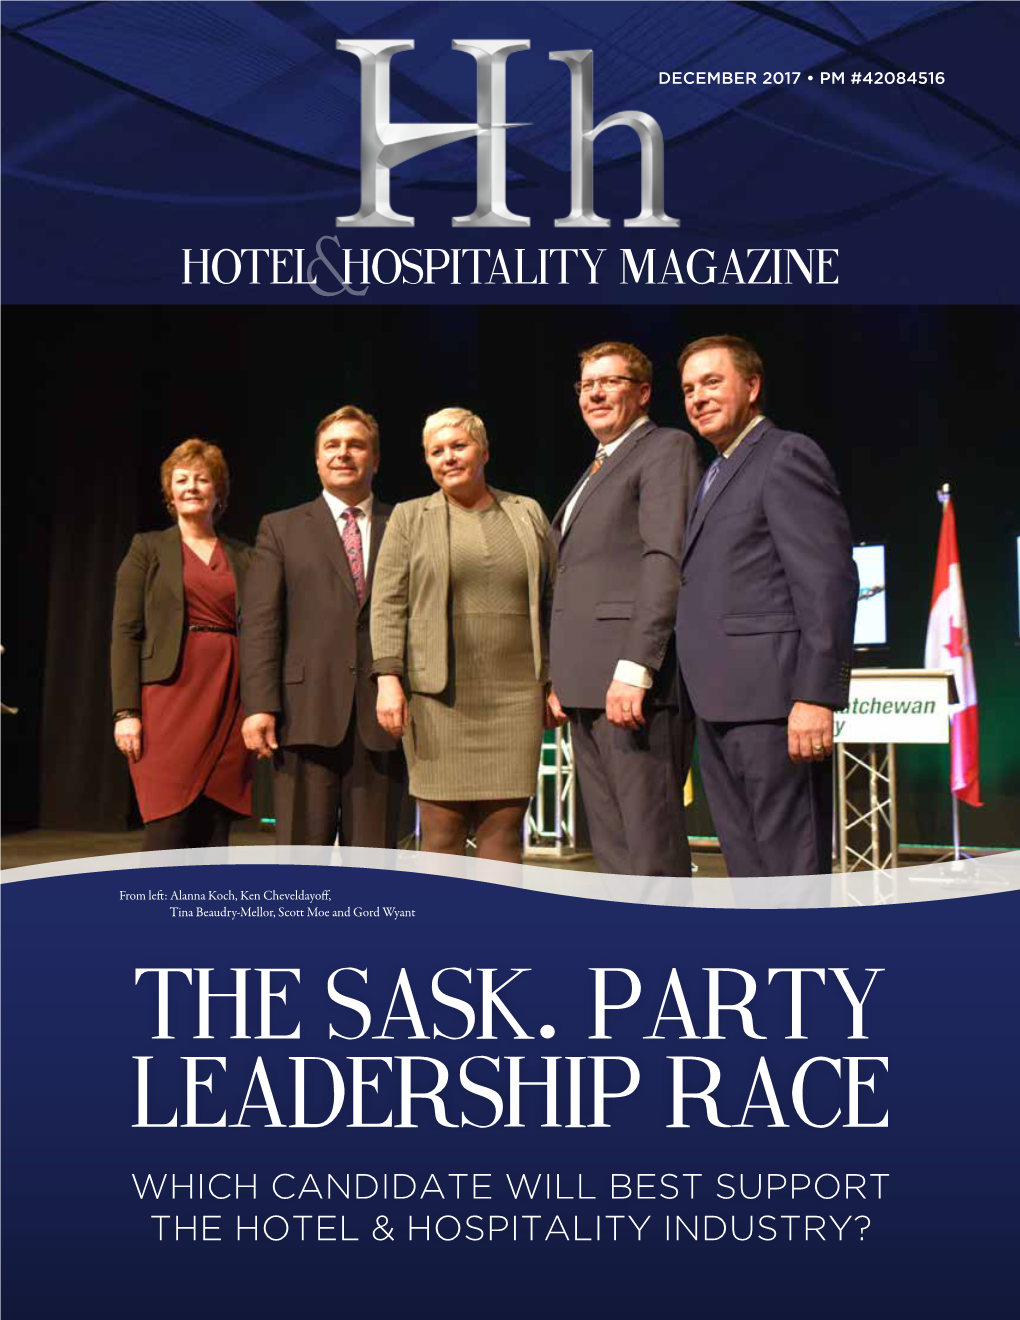 The Sask. Party Leadership Race WHICH CANDIDATE WILL BEST SUPPORT the HOTEL & HOSPITALITY INDUSTRY? SHHA 2017 Ad 3.Qxp Layout 1 2017-12-13 4:50 PM Page 1